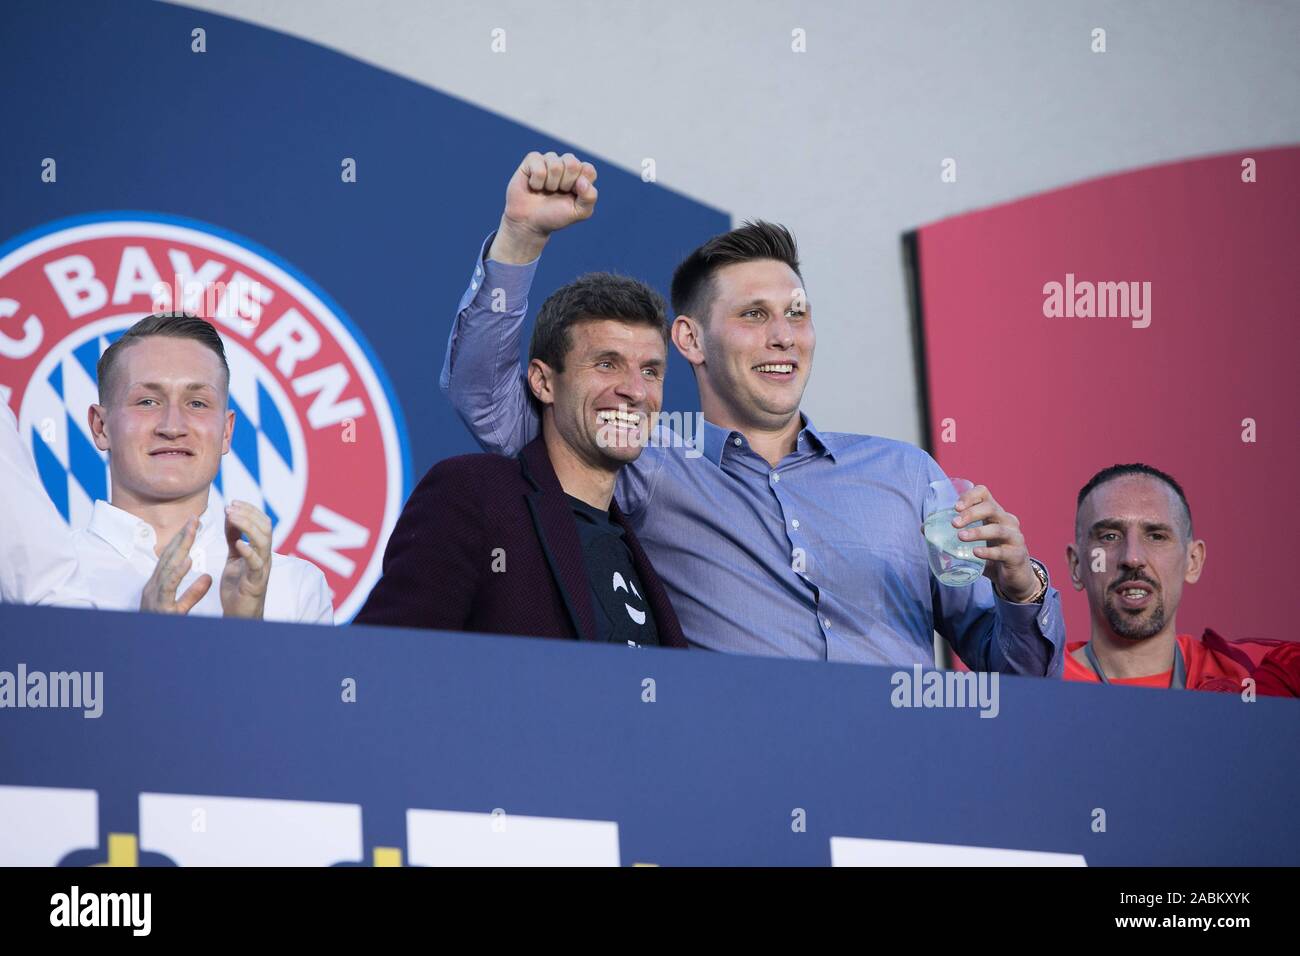 FC Bayern Munich celebrates winning the seventh German Football Championship in a row with a fan party in Paulaner am Nockherberg. In the picture Thomas Müller (2nd from left) with Niklas Süle (2nd from right) and Franck Ribery (right). [automated translation] Stock Photo